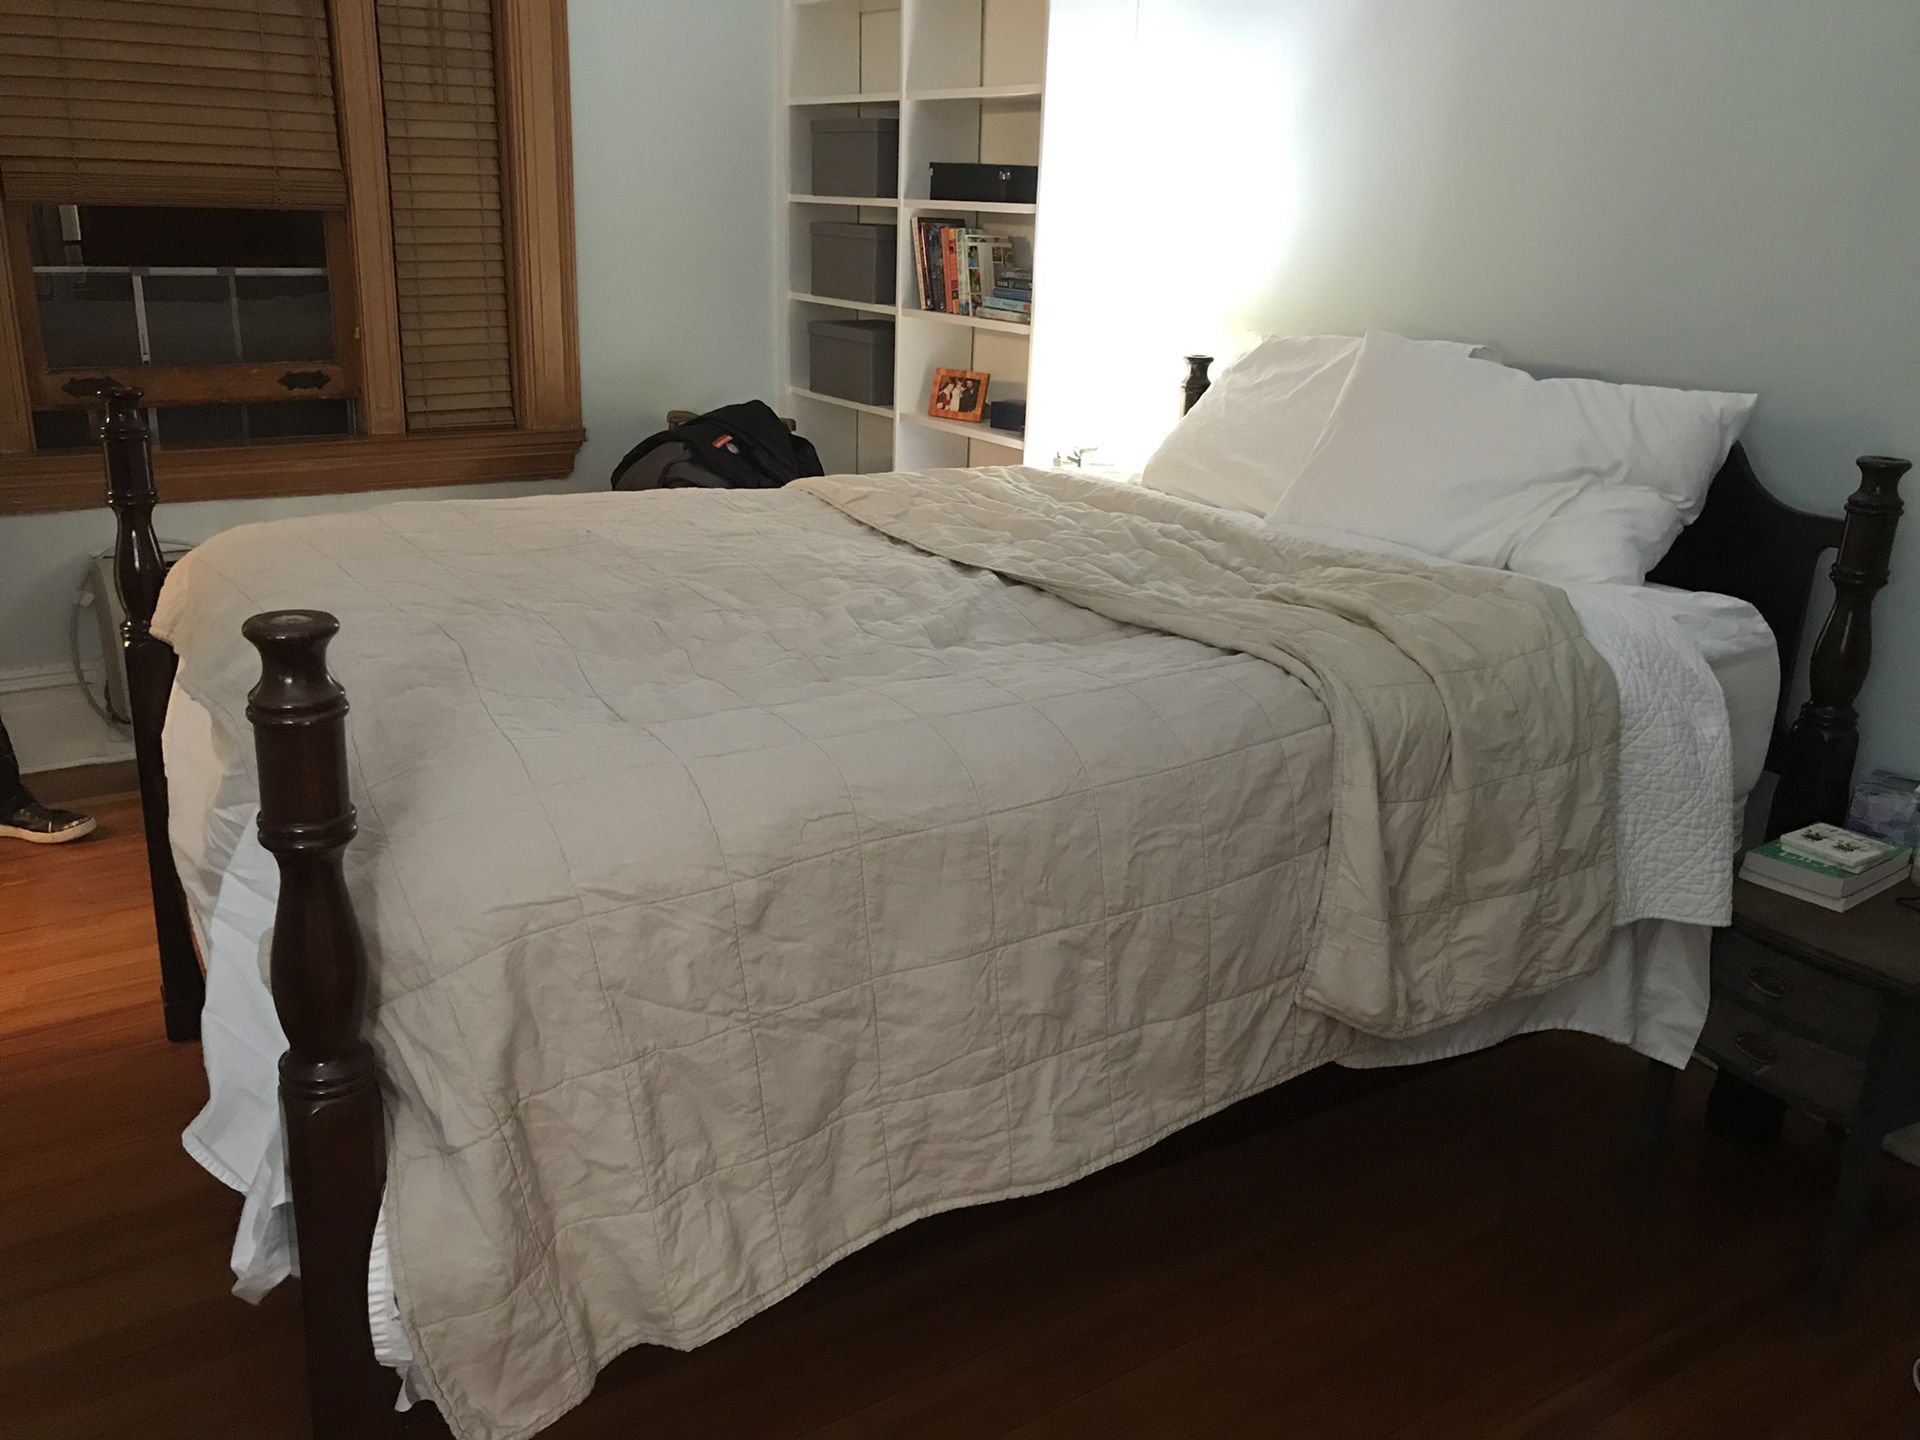 Queen bed frame with box spring - mattress not included